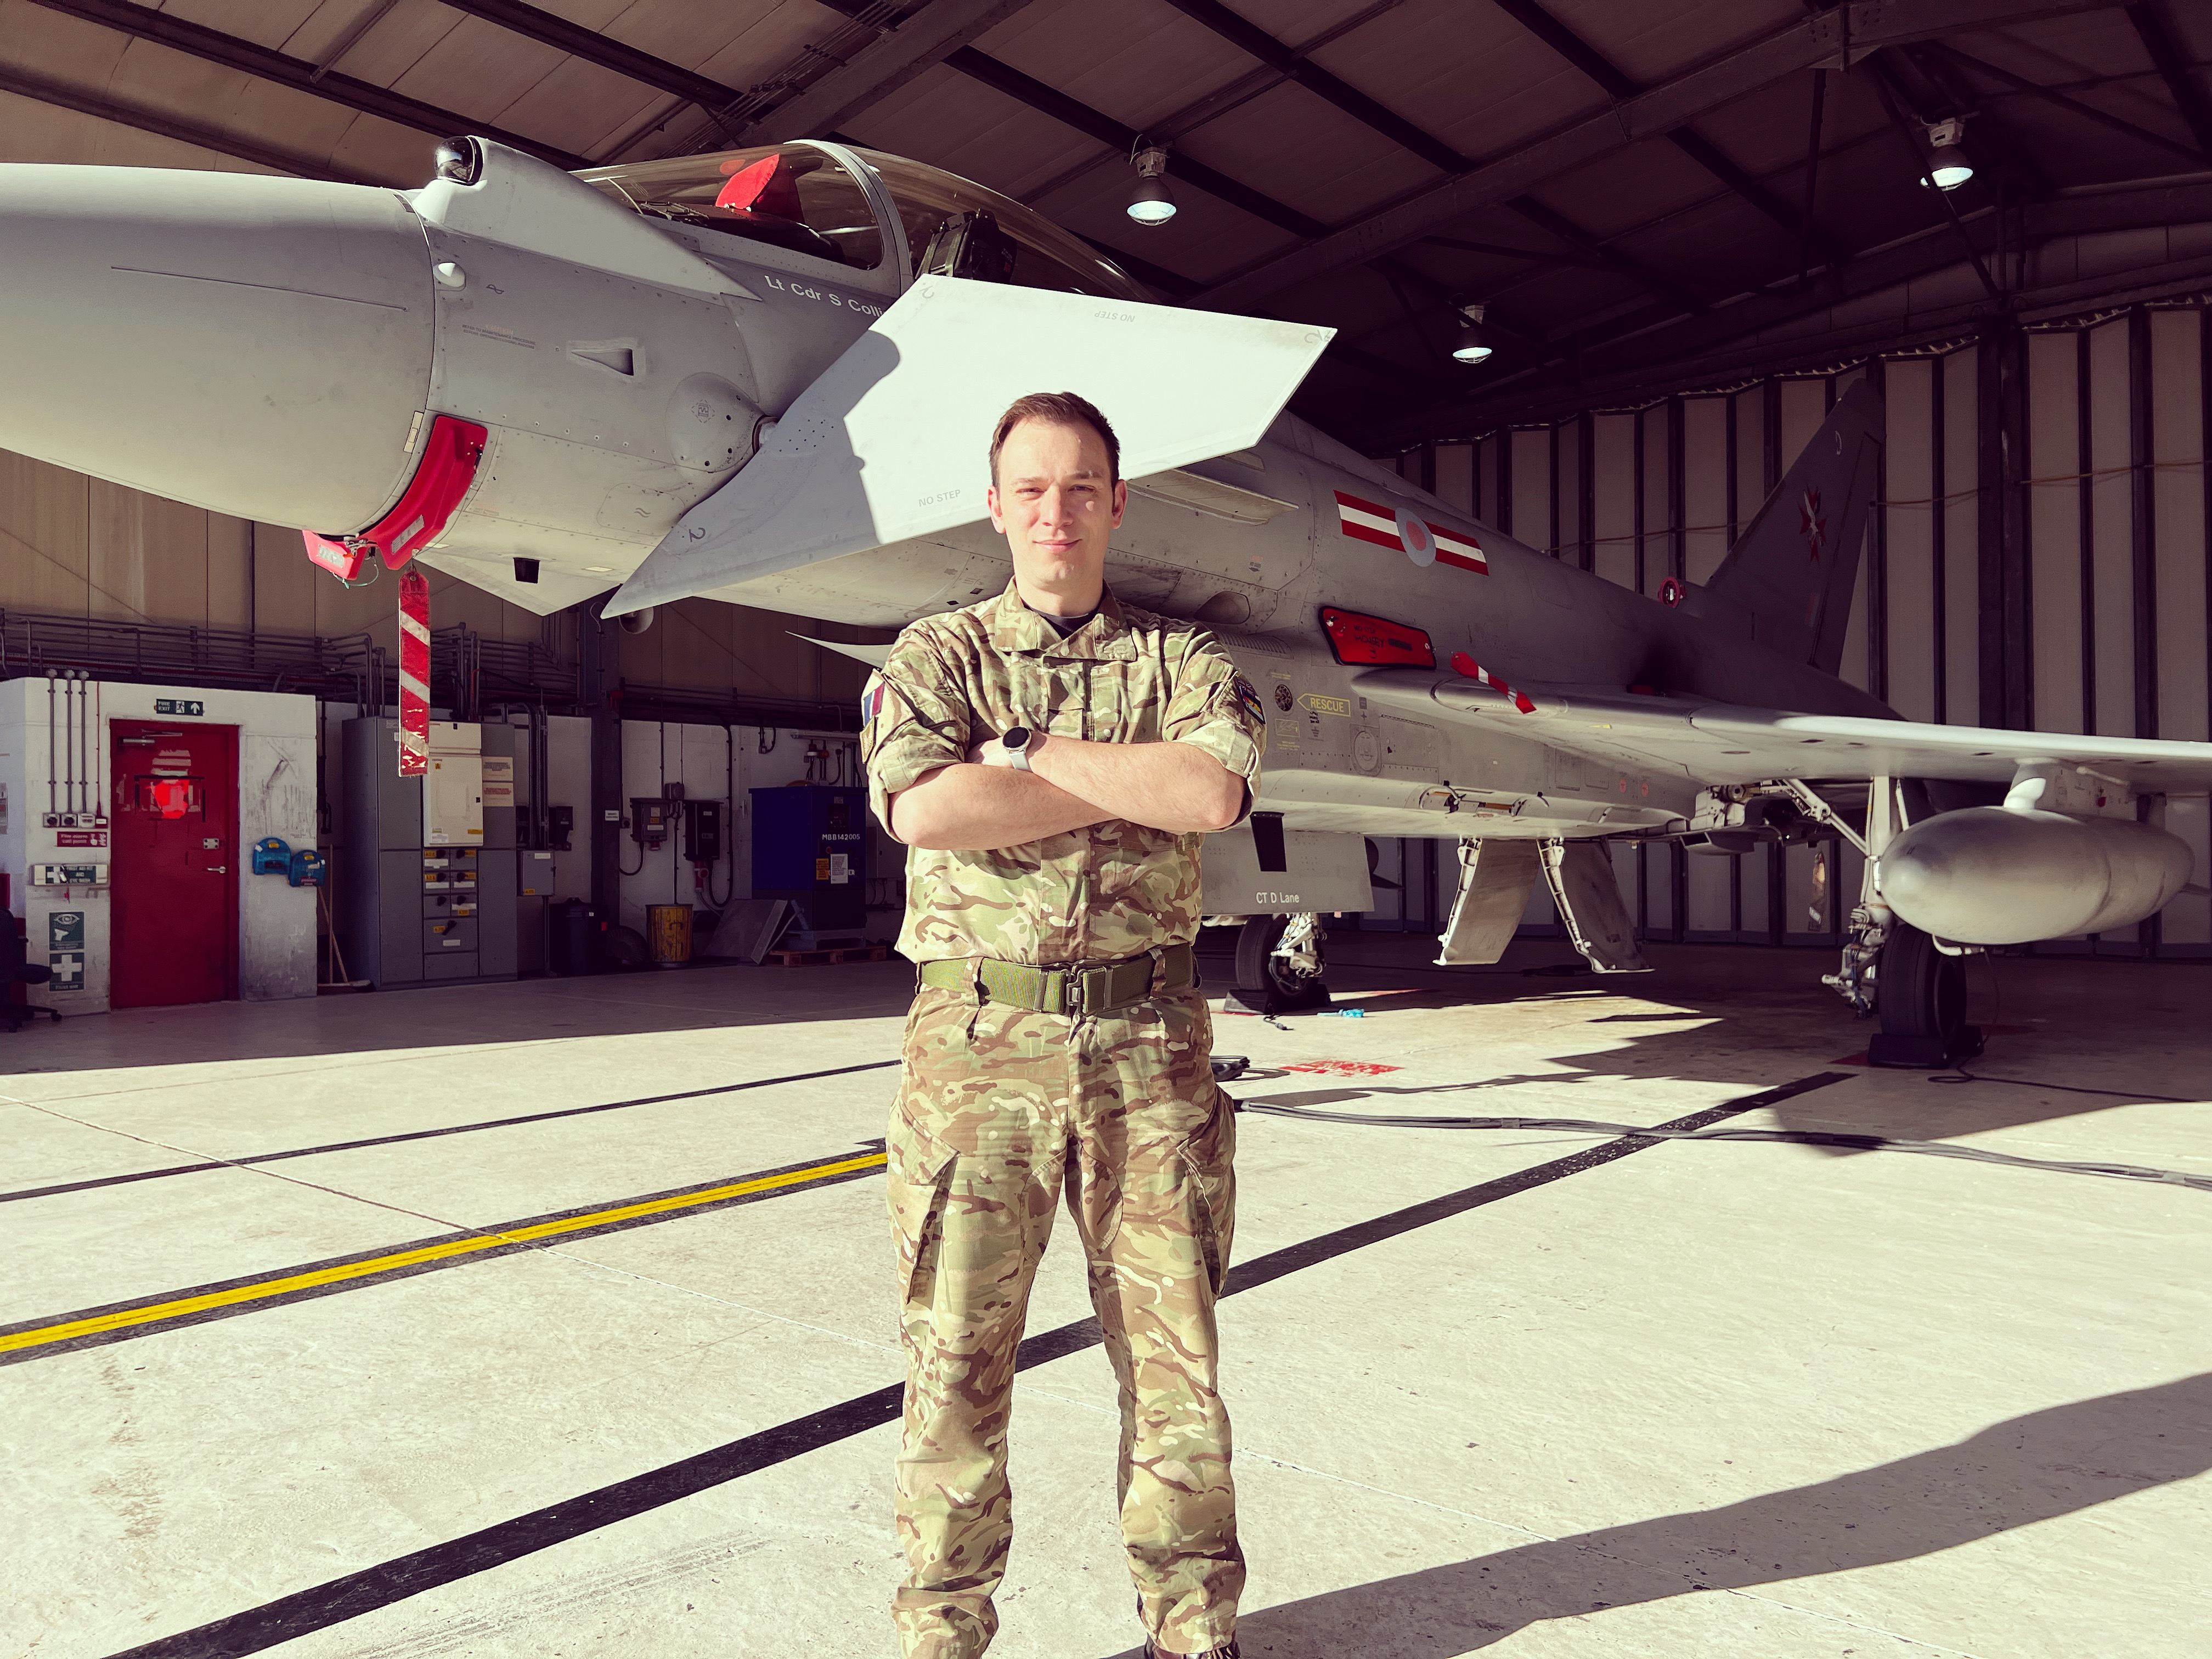 Image shows RAF aviator standing by a RAF Typhoon under the hangar.